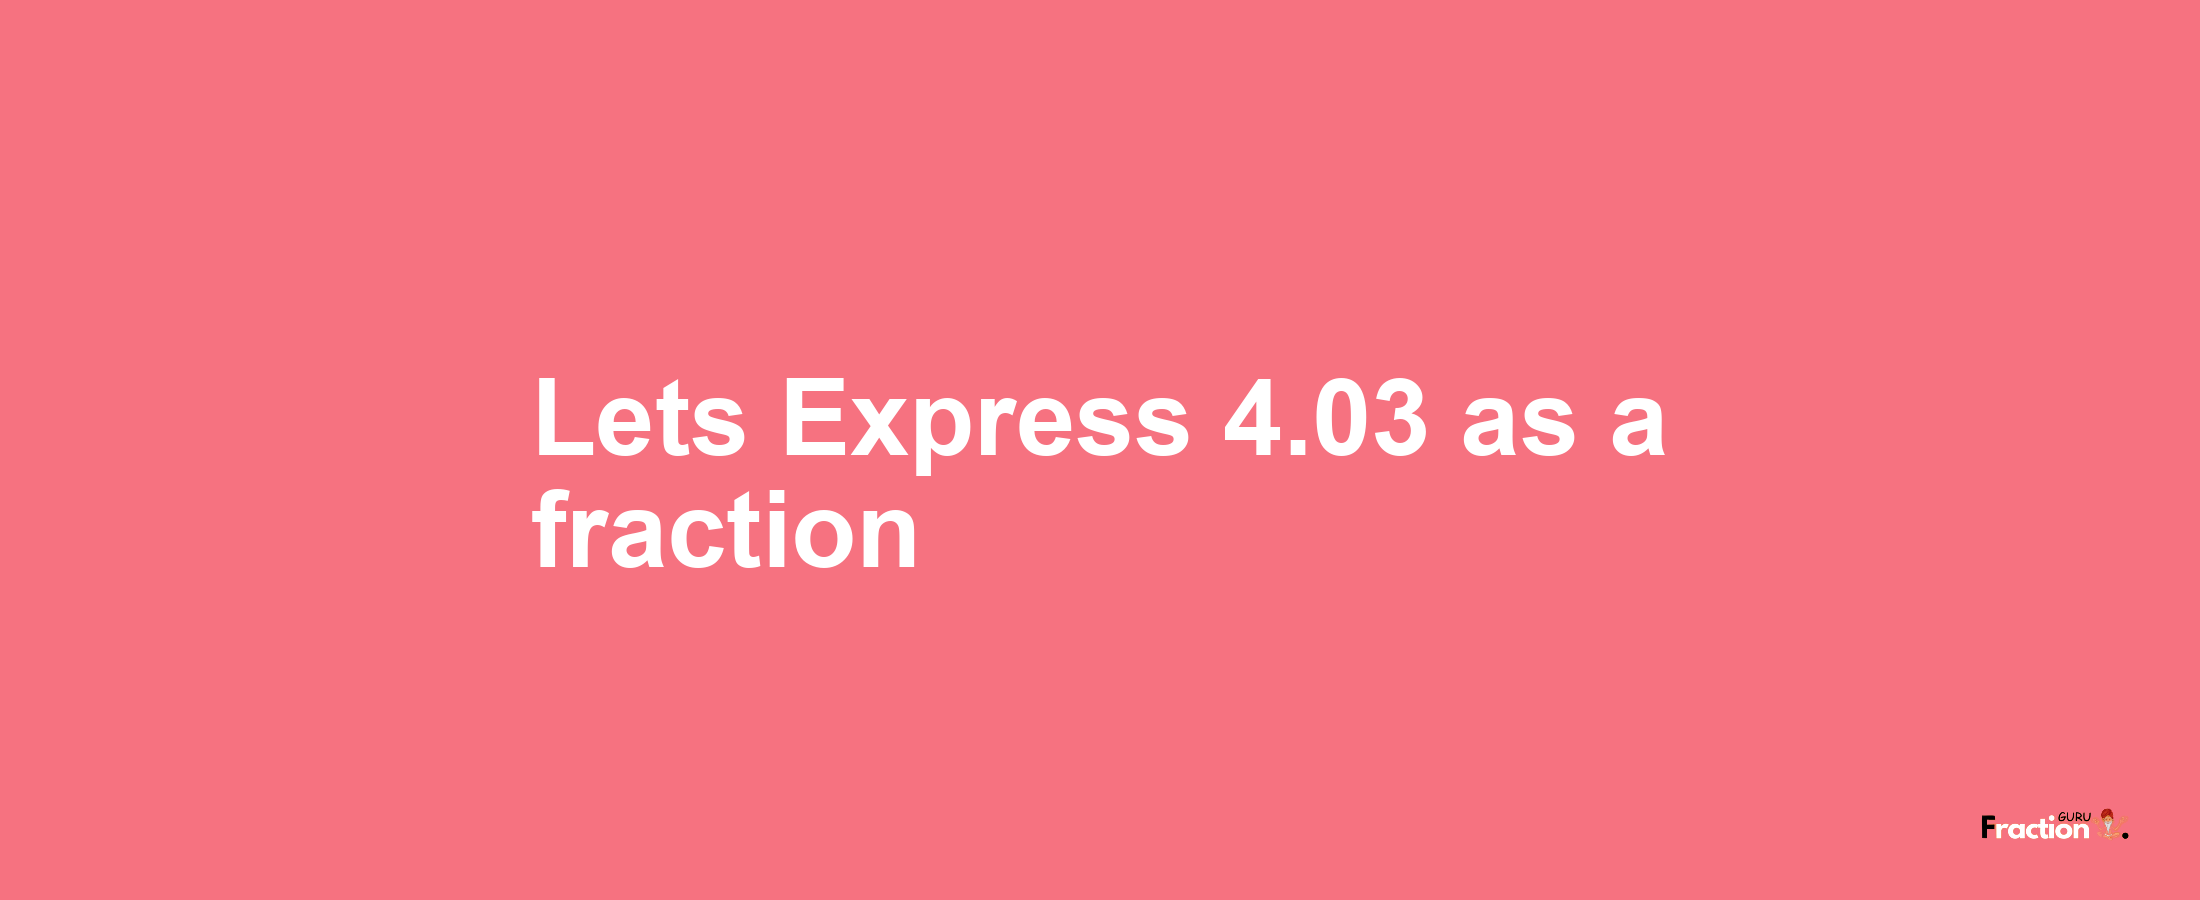 Lets Express 4.03 as afraction